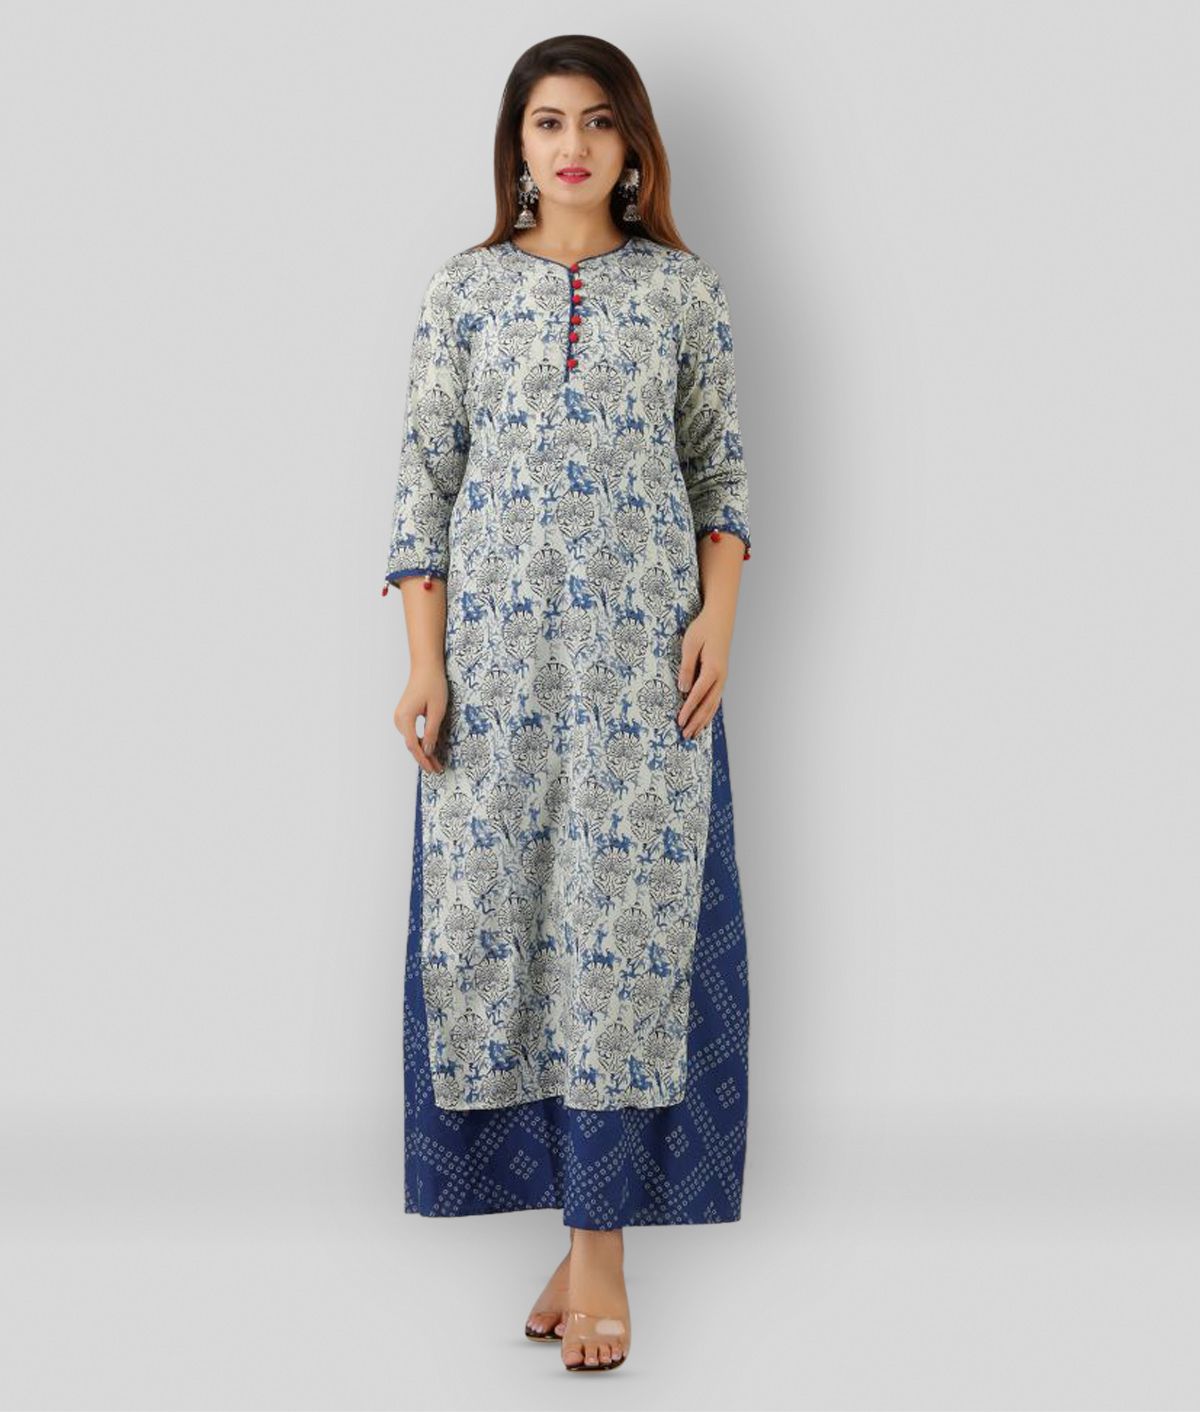 IRIDAA JAIPUR - Blue Flared Cotton Women's Stitched Ethnic Gown ( Pack of 1 )